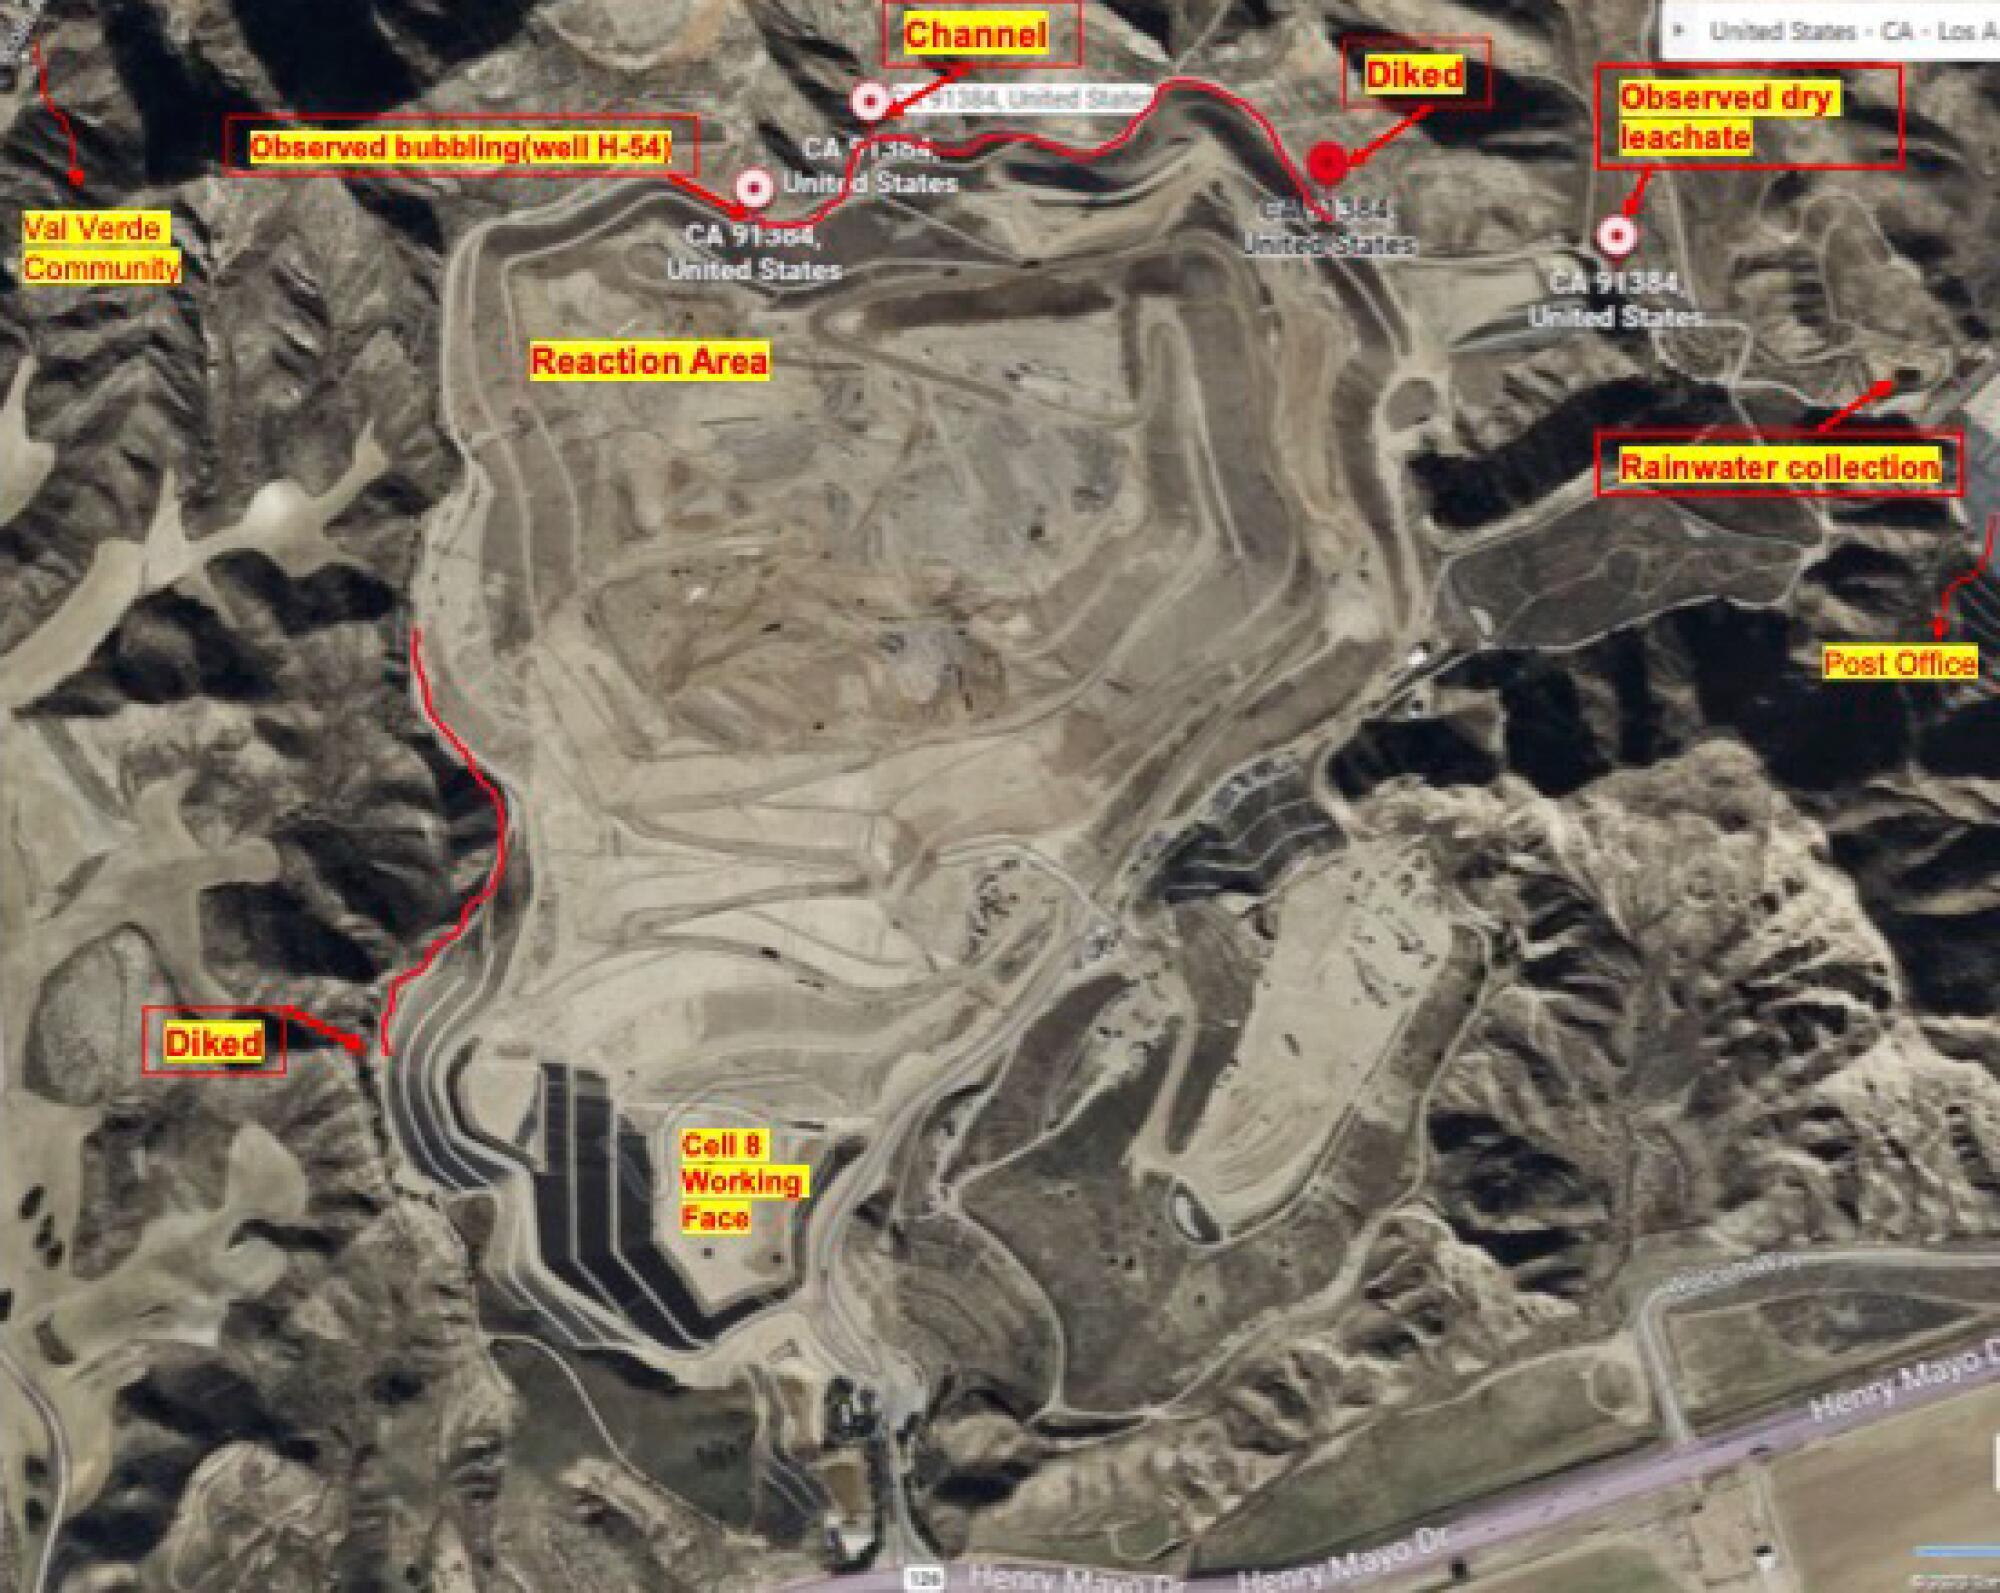 A roughly 35-acre portion of Chiquita Canyon Landfill is smoldering, causing polluted water to spill out.